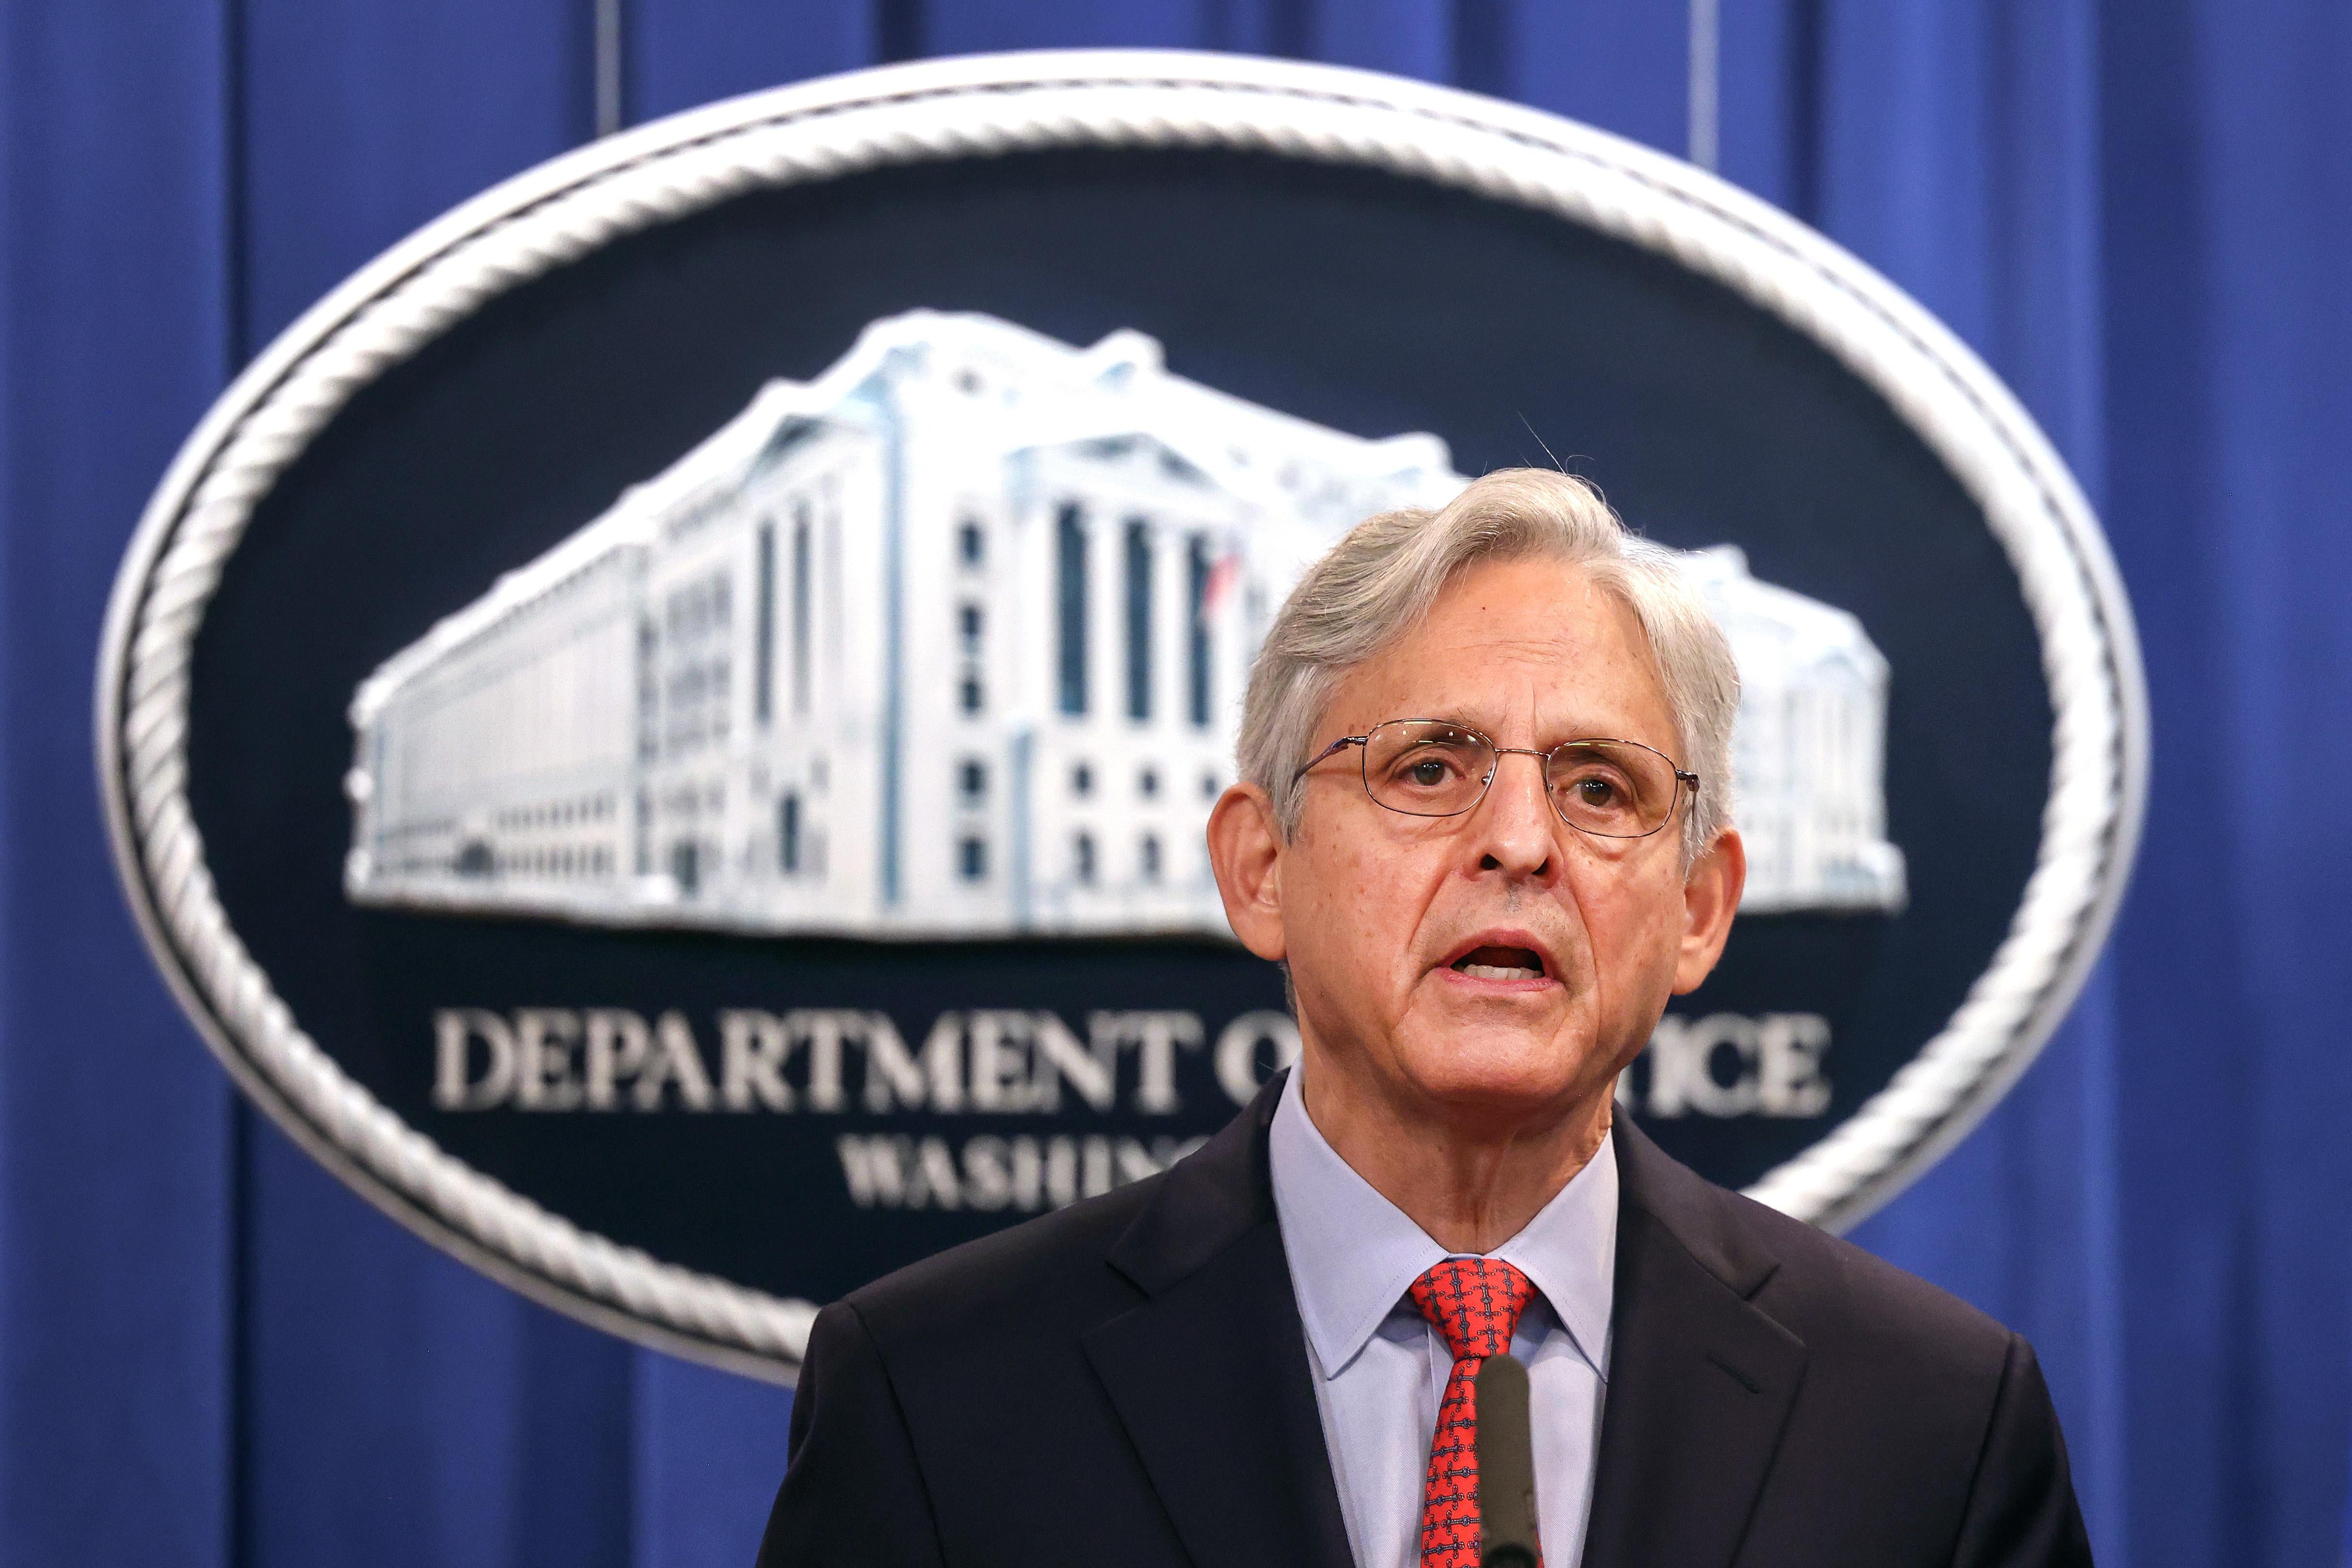 Attorney General Merrick Garland announces a federal investigation of the City of Phoenix and the Phoenix Police Department during a news conference at the Department of Justice on August 05, 2021 in Washington, D.C.